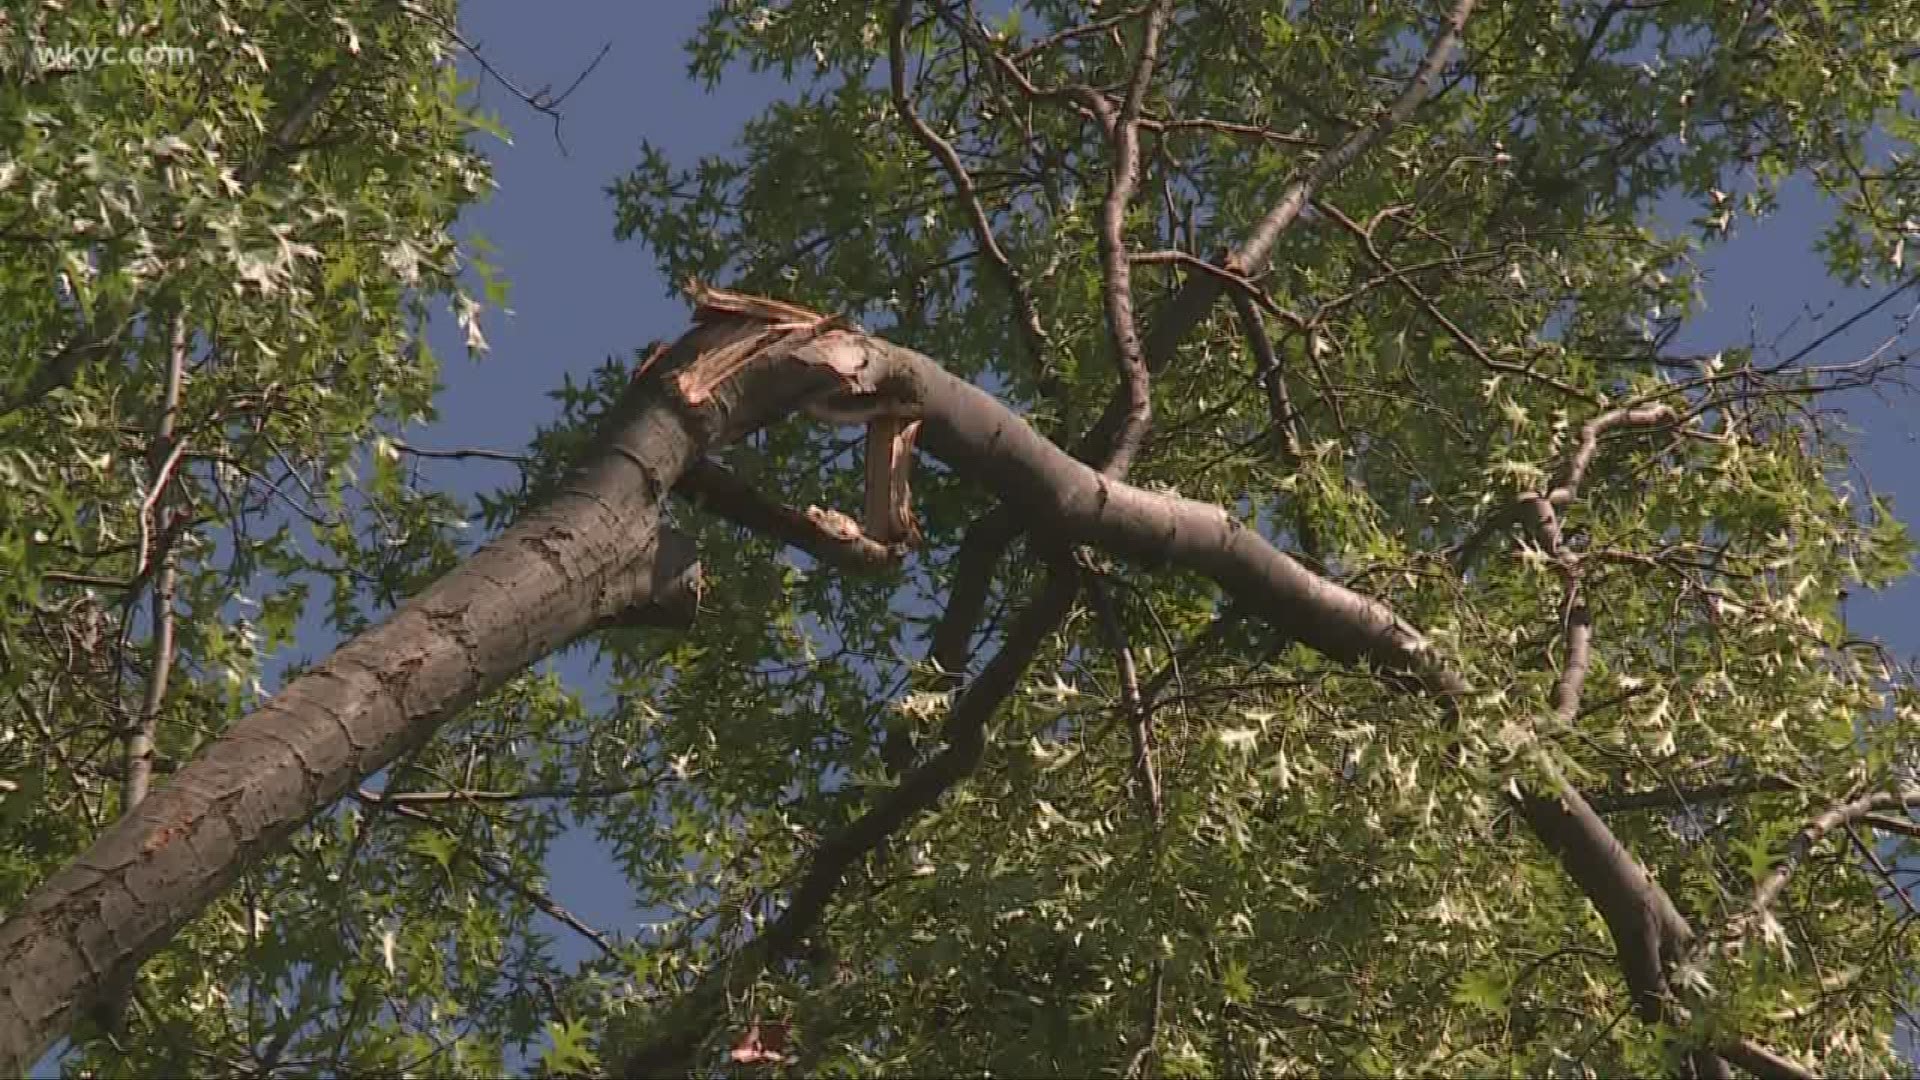 Cleveland Heights is still cleaning up after this past weekend's microburst. Carl Bachtel shares some tips.